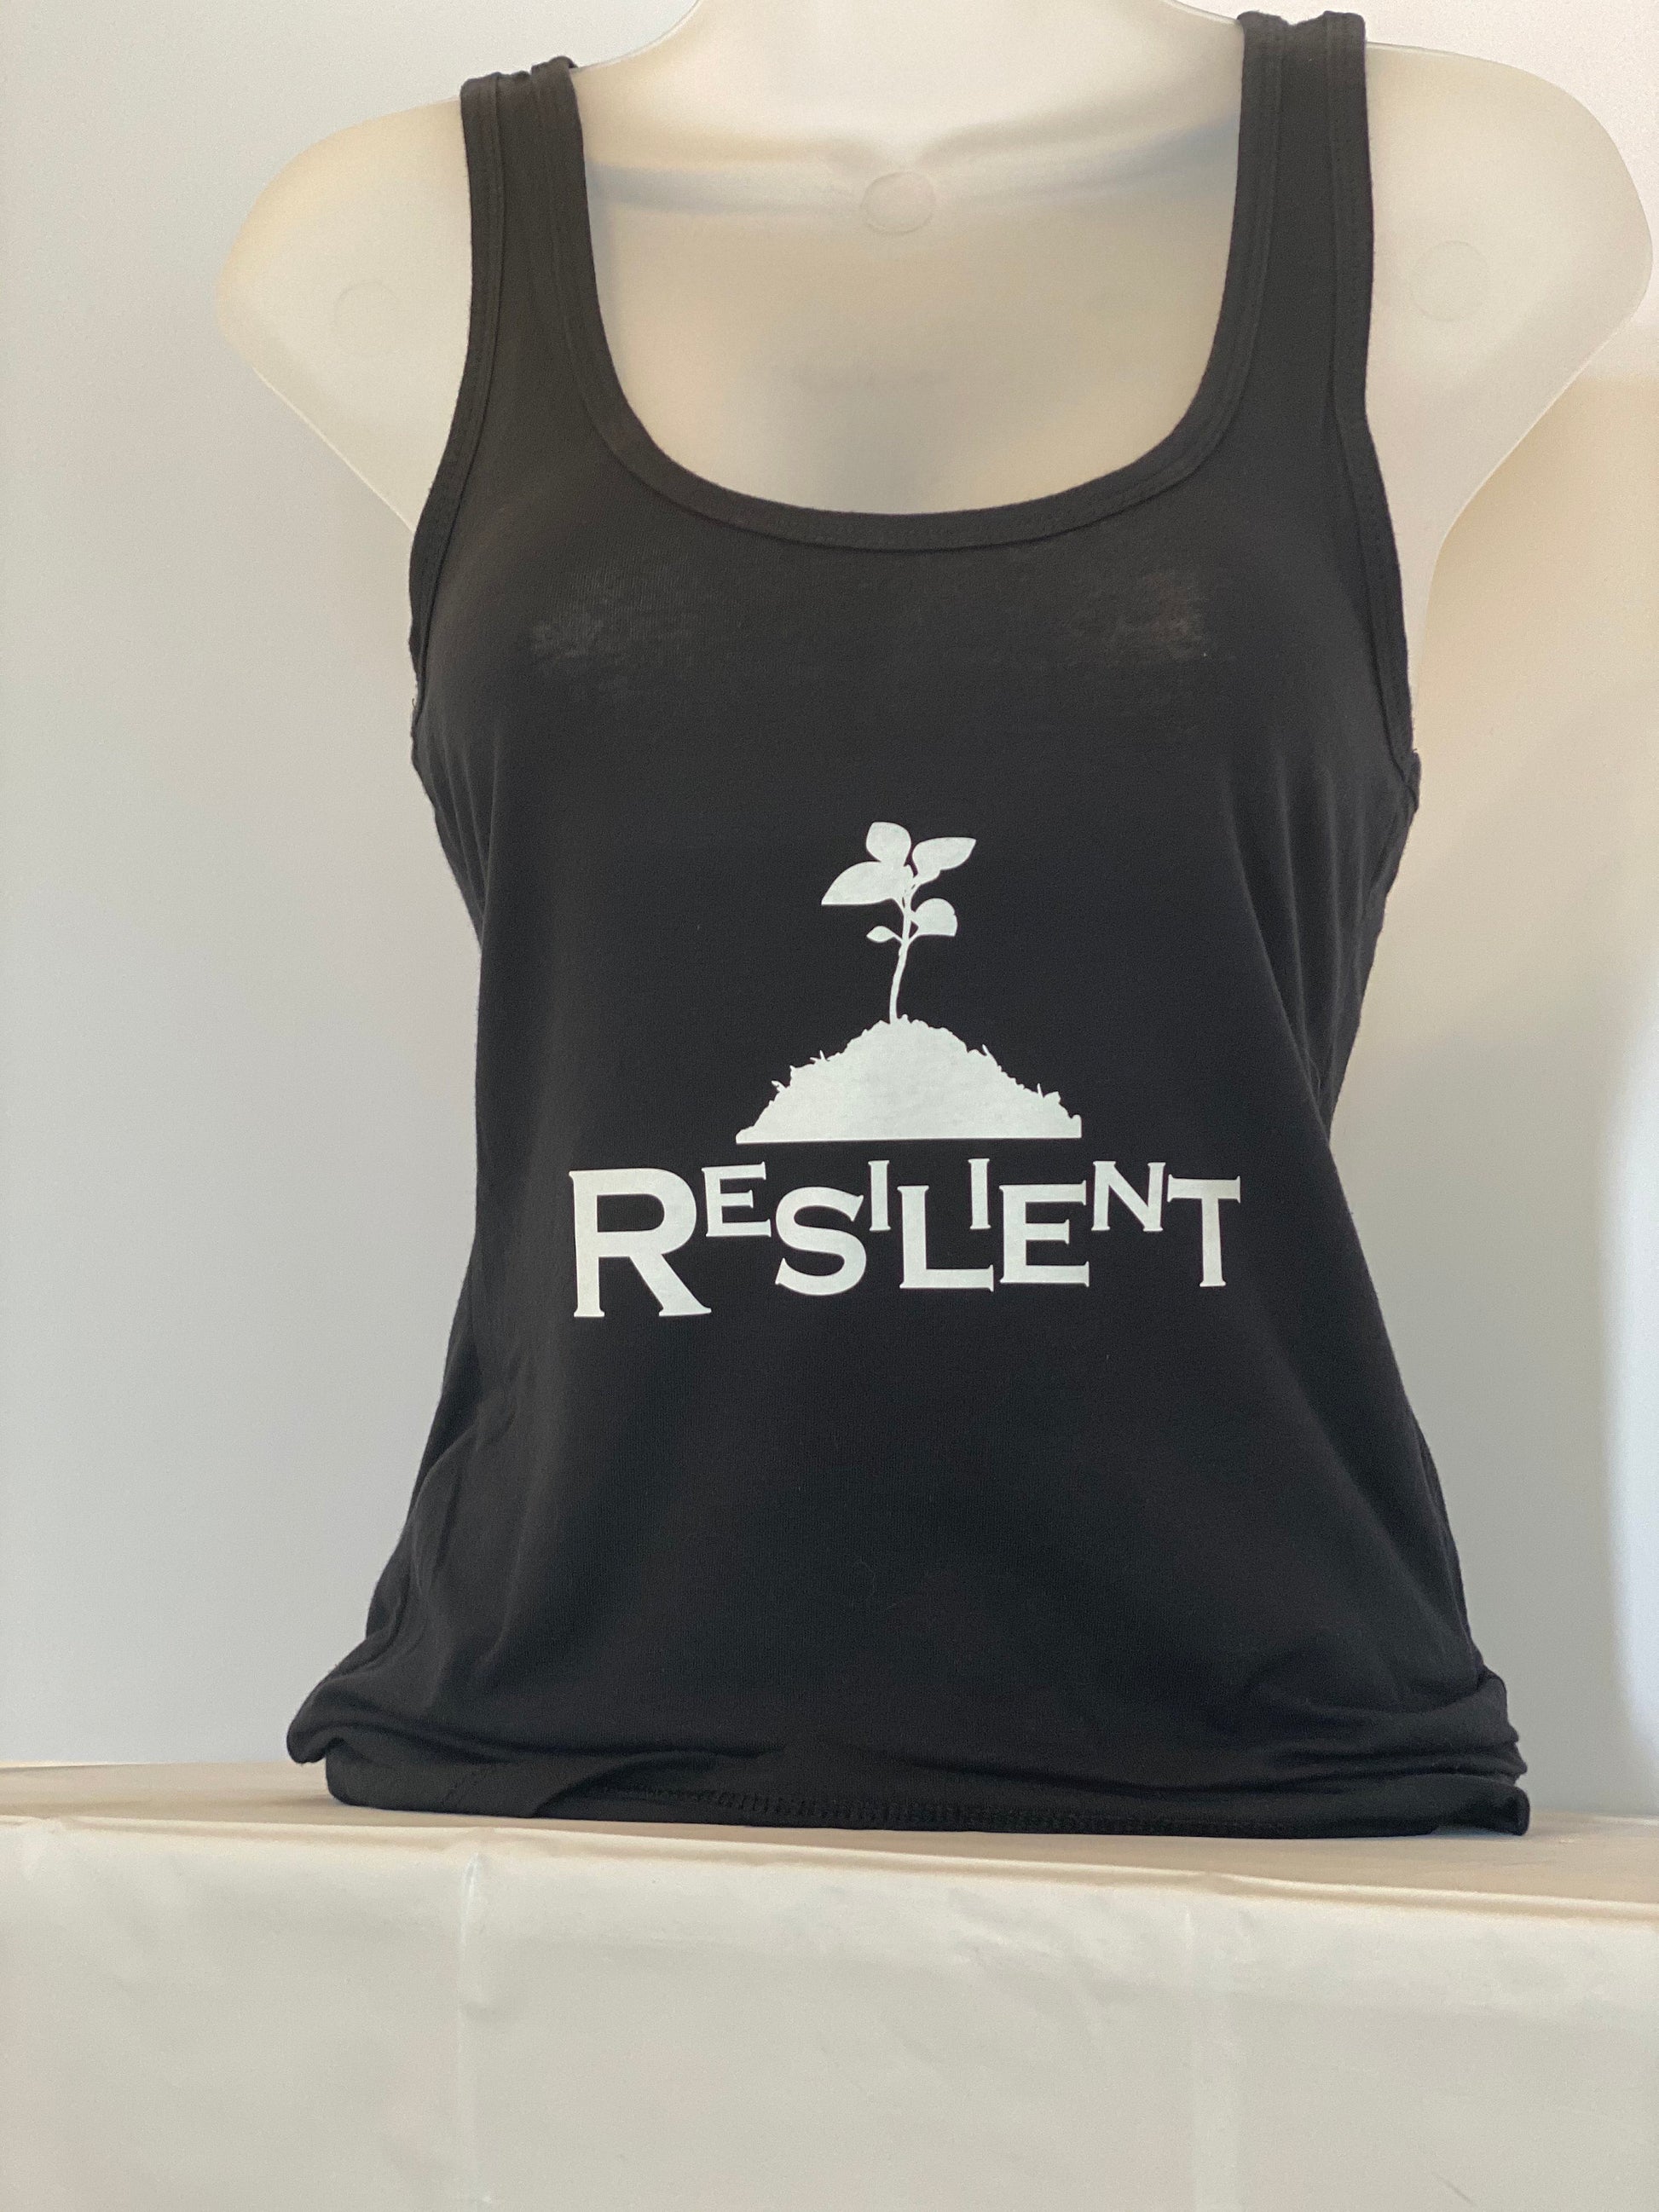 Resilient Tank, T-shirt, Hoodie, or Tote